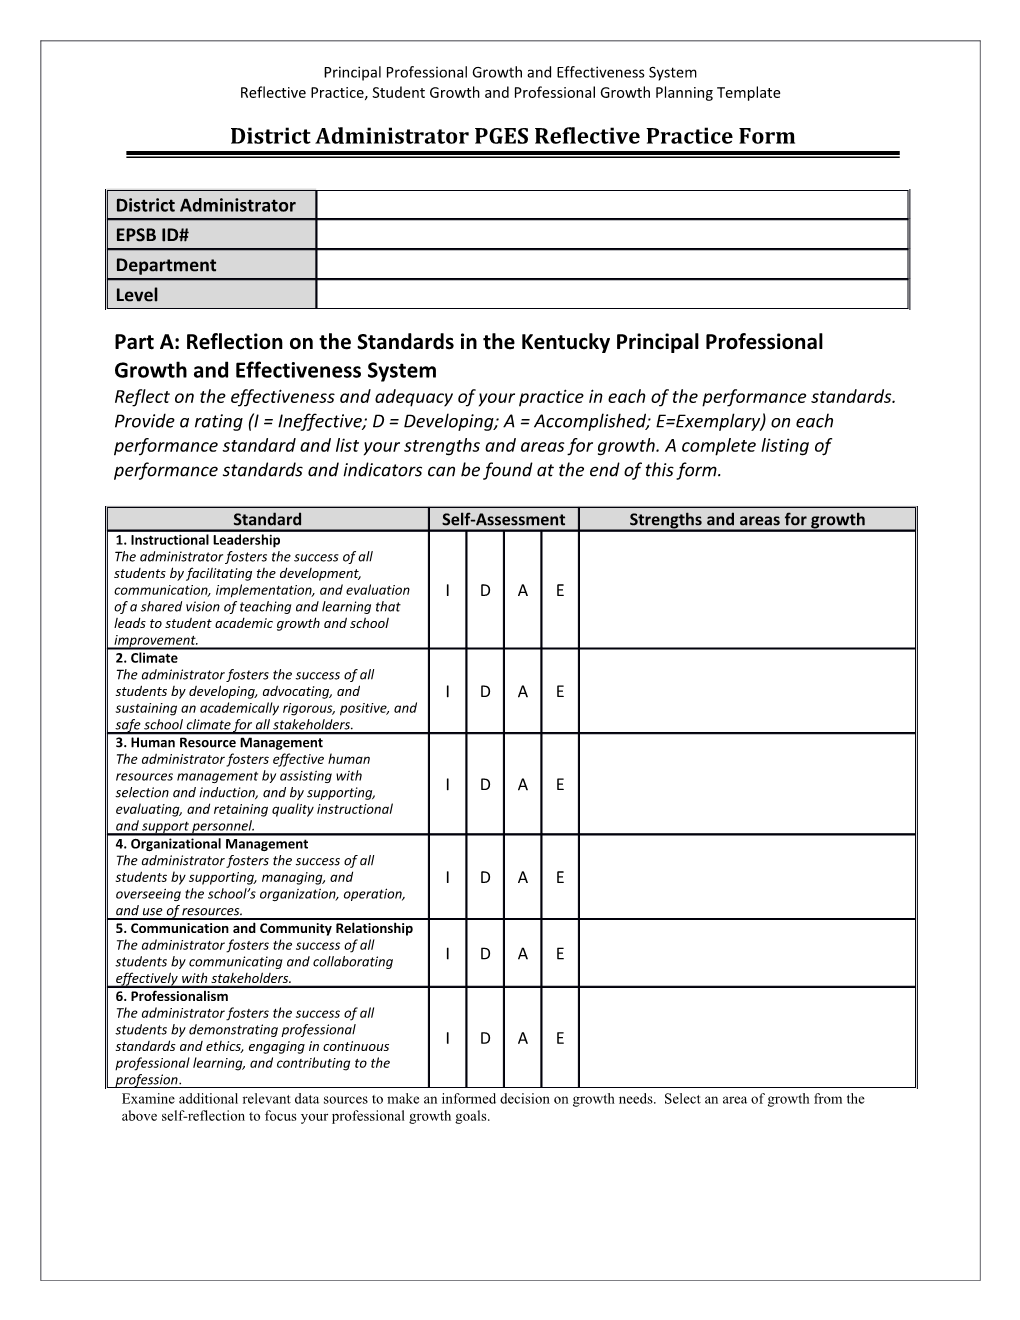 Principal Reflective Practice Student Growth and Professional Growth Planning Template s1